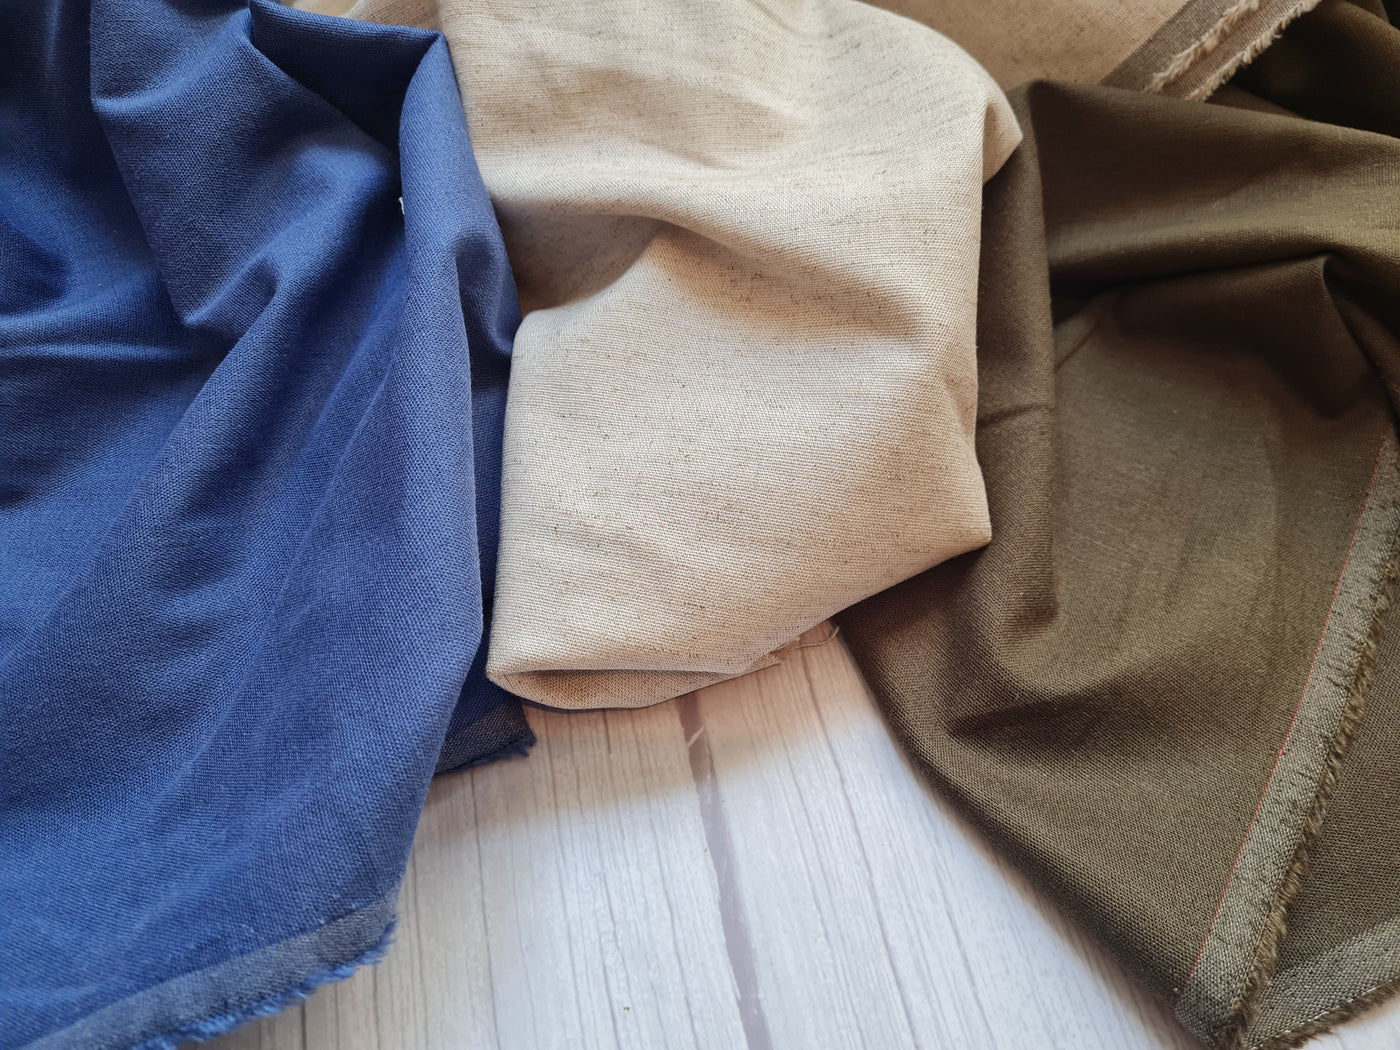 Stretch Linen Viscose Mix Fabric by the half metre: dressmaking, crafts.